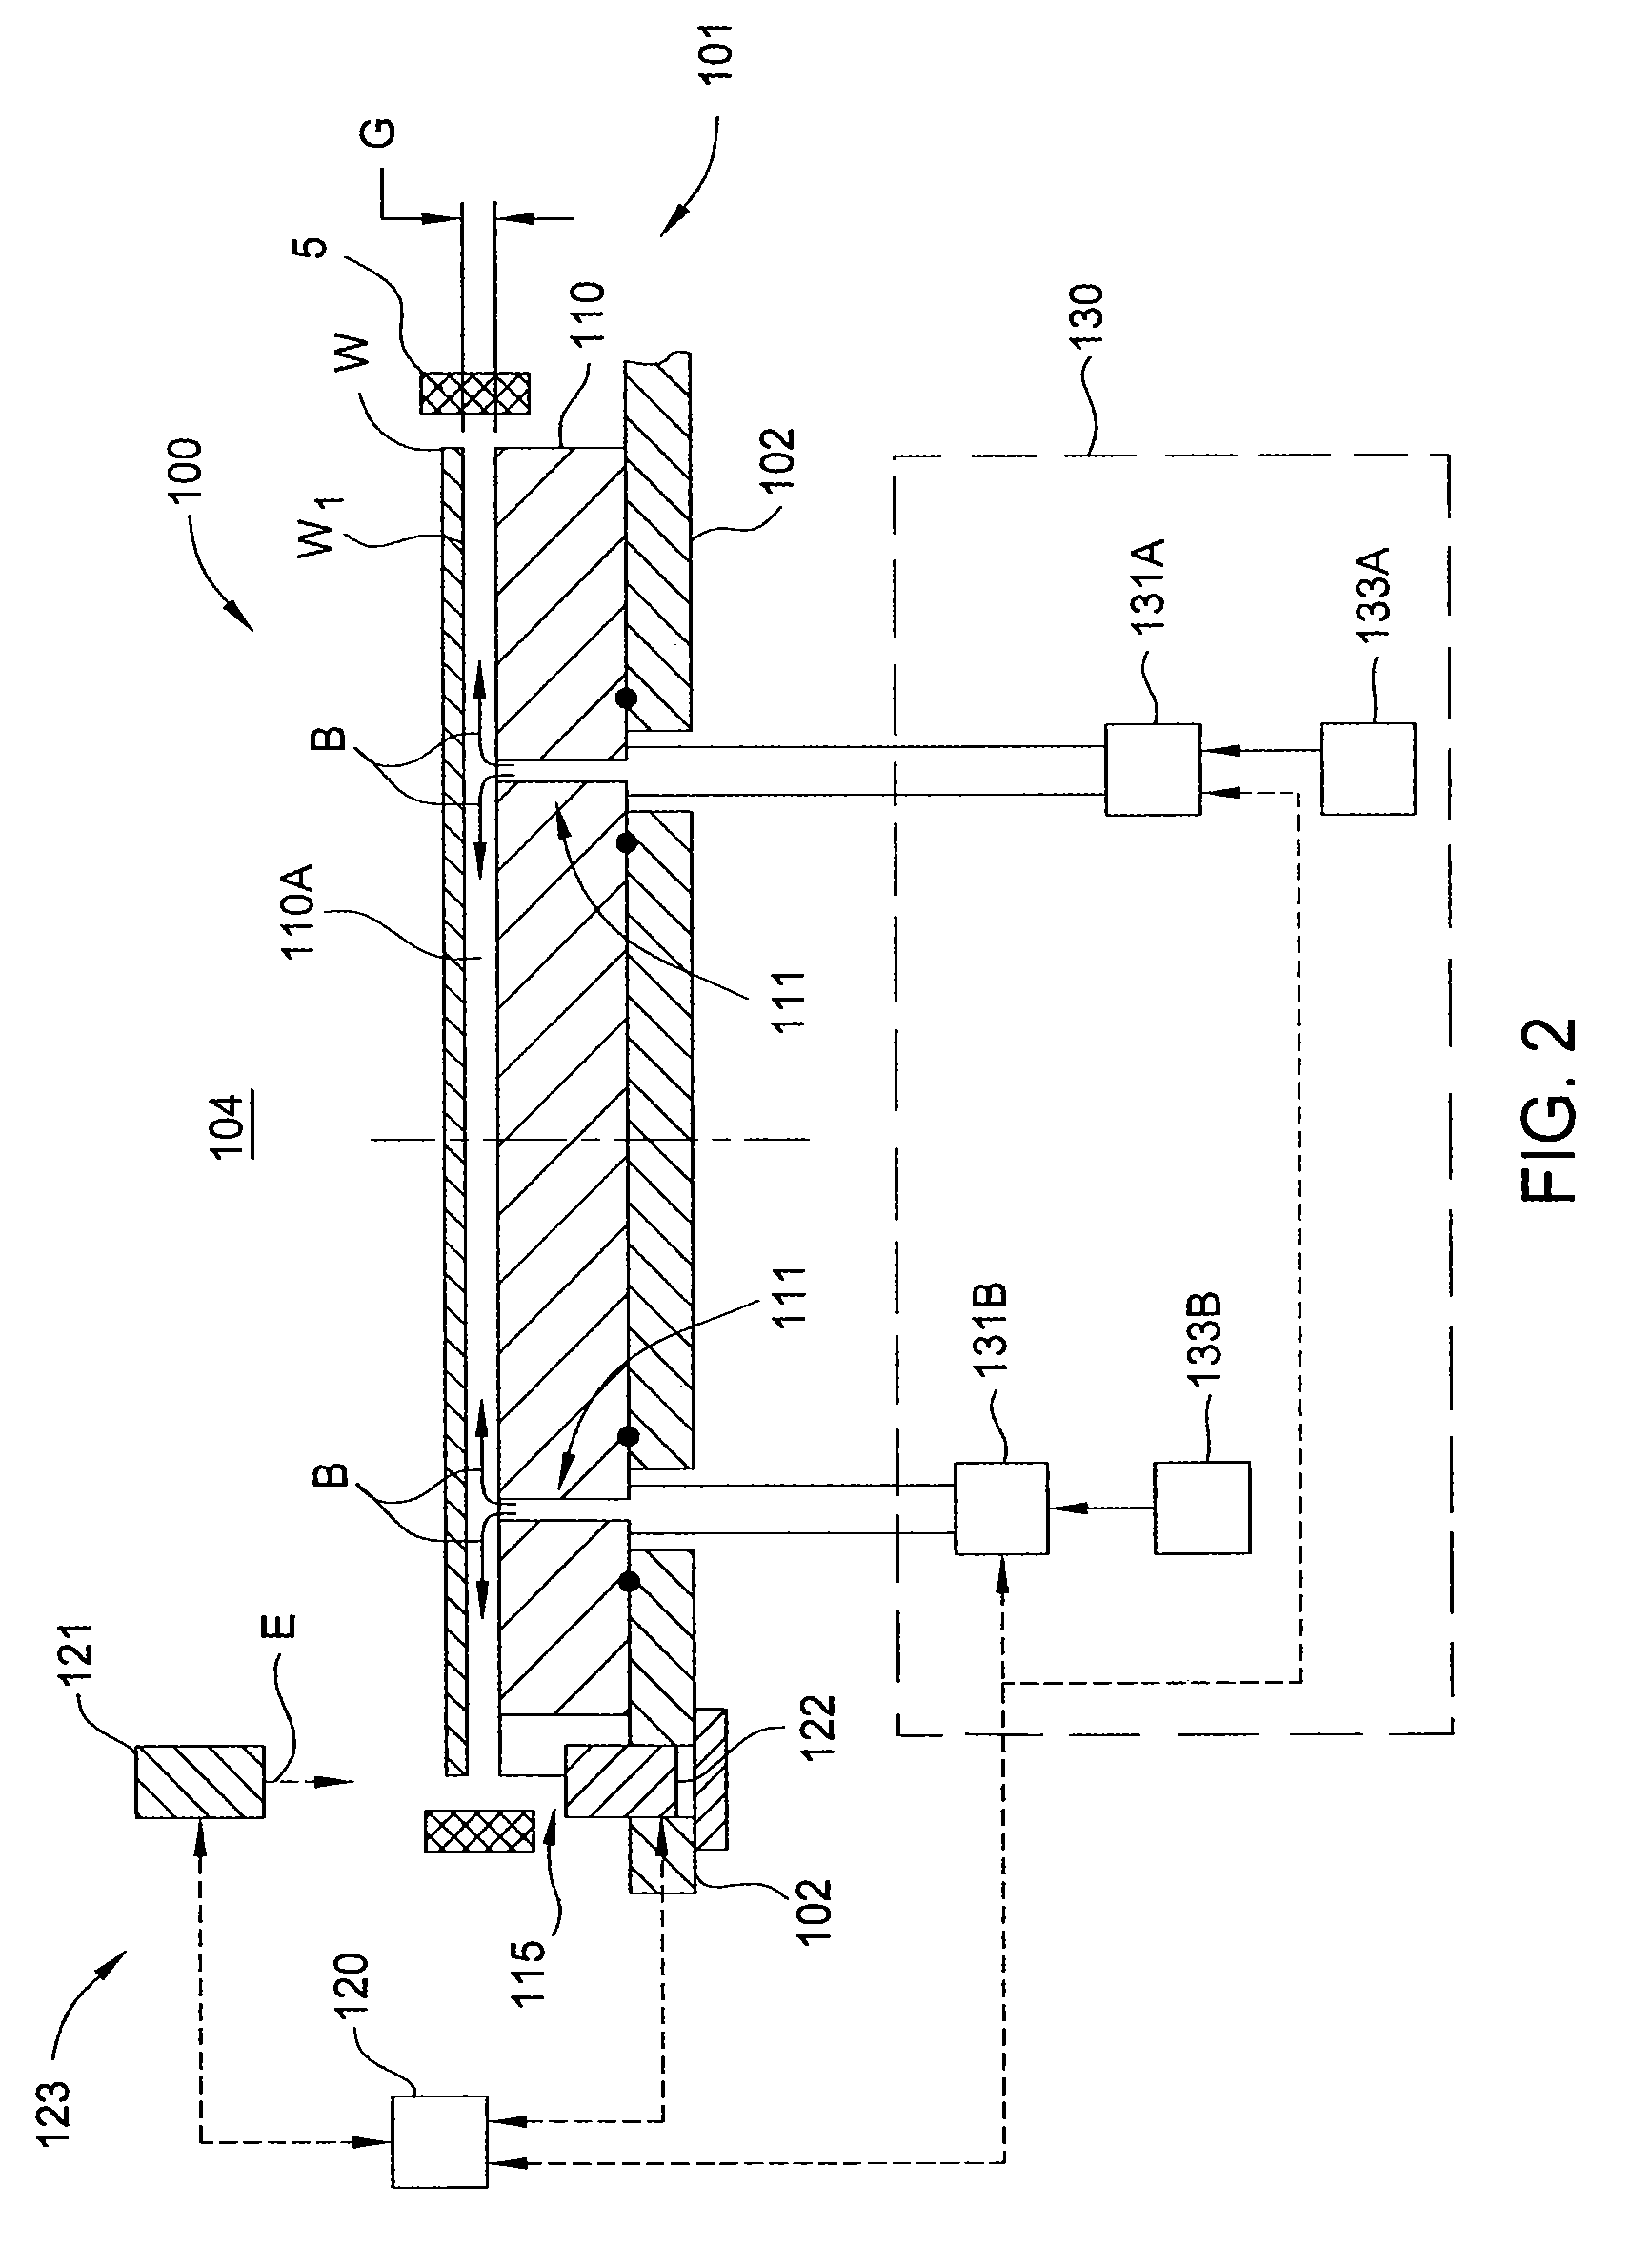 Apparatus and method for supporting, positioning and rotating a substrate in a processing chamber